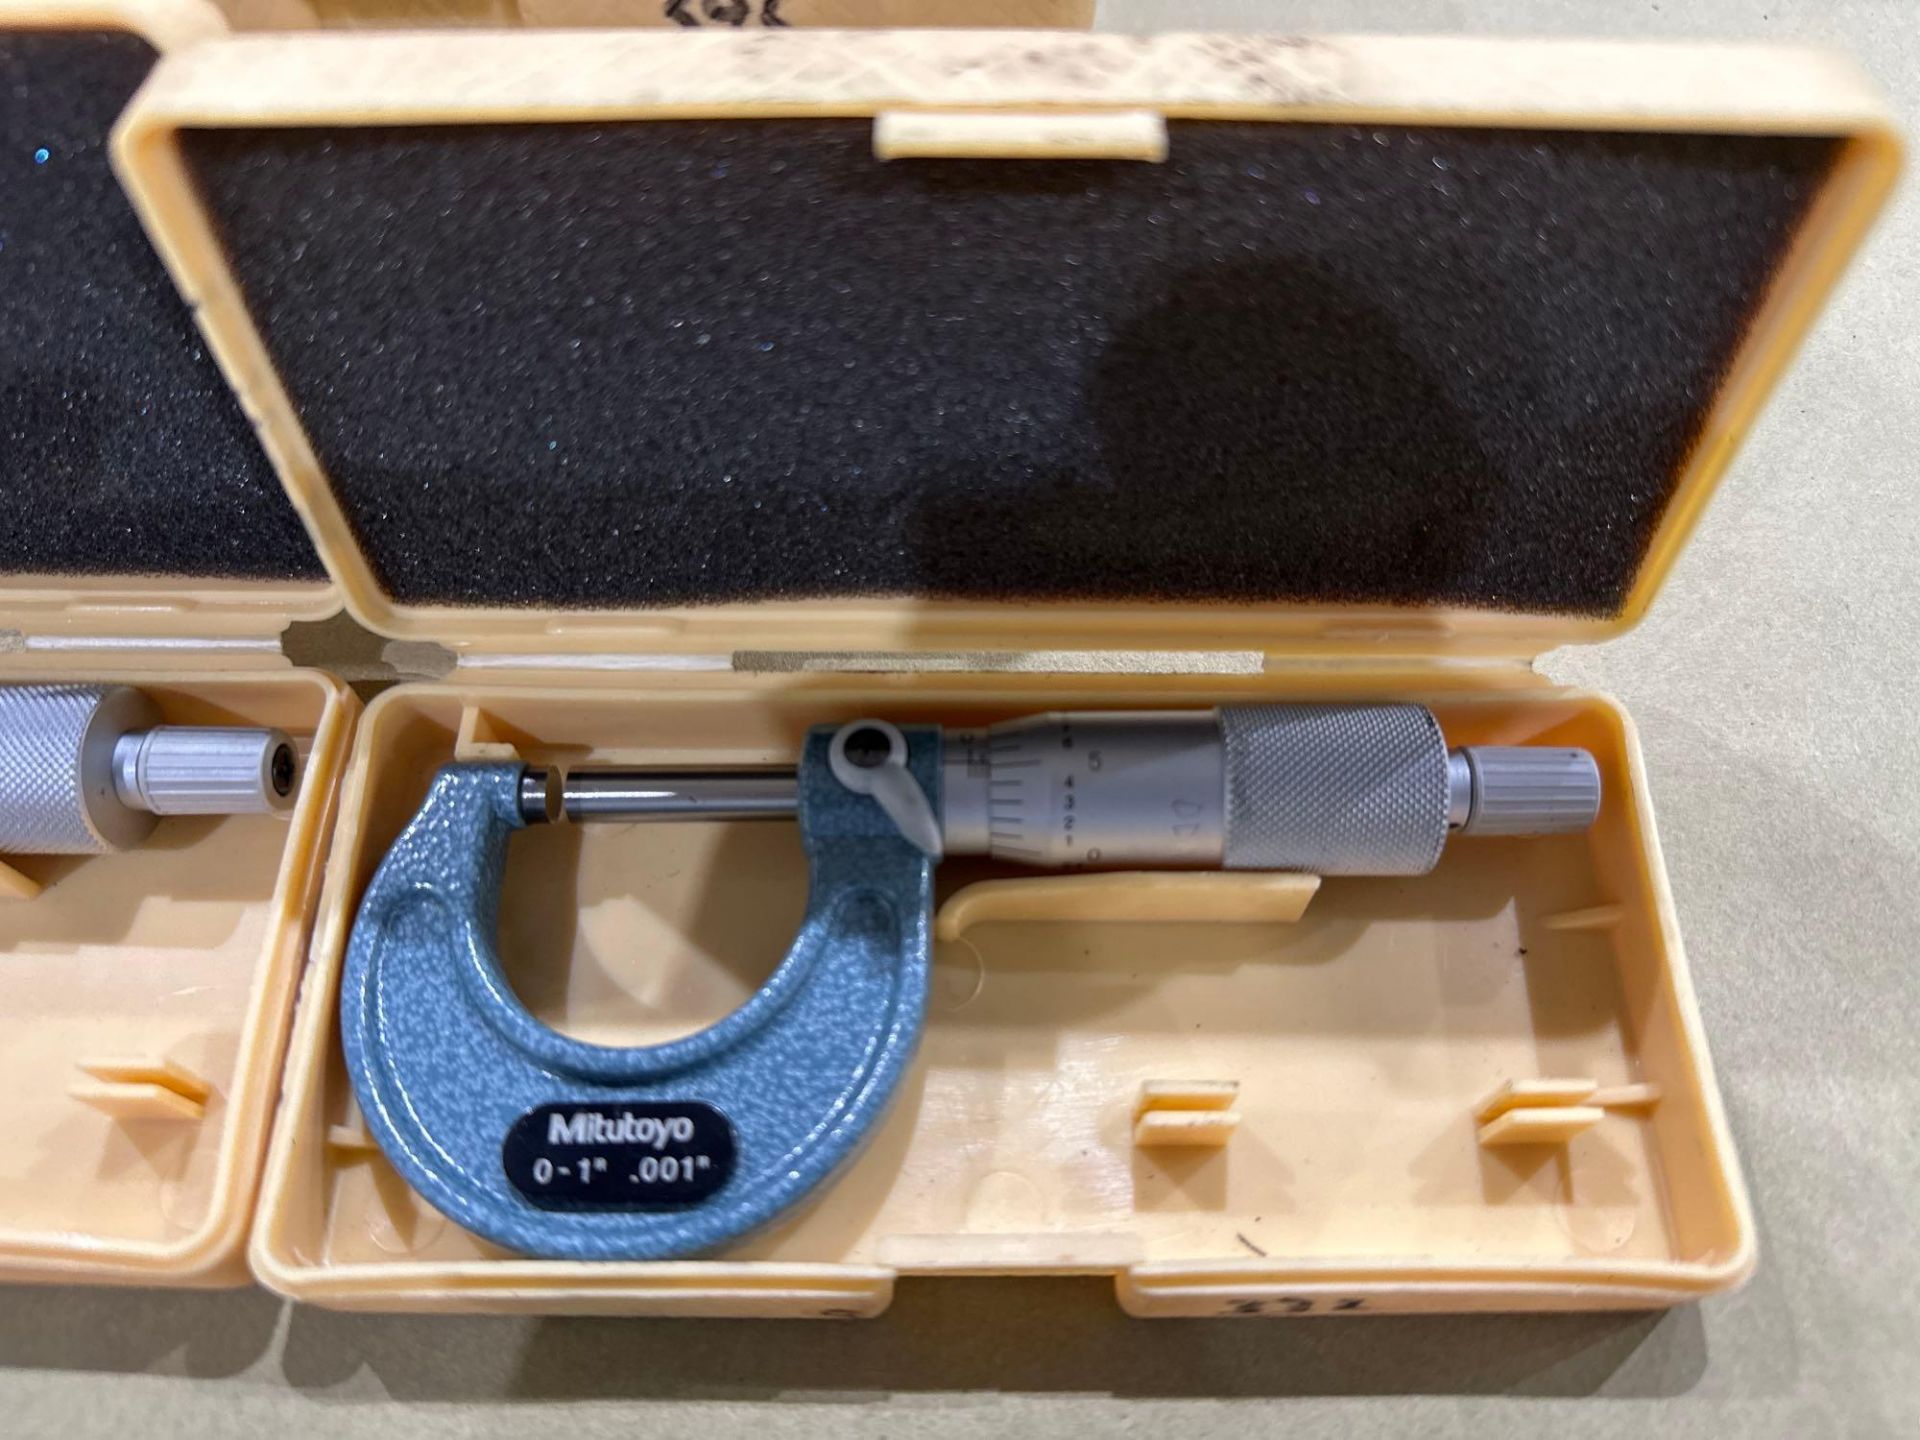 Lot of 12: Mitutoyo Mechanical OD Micrometer M110-1”, 0-1” Range, .001” Graduation, in plastic boxes - Image 5 of 7